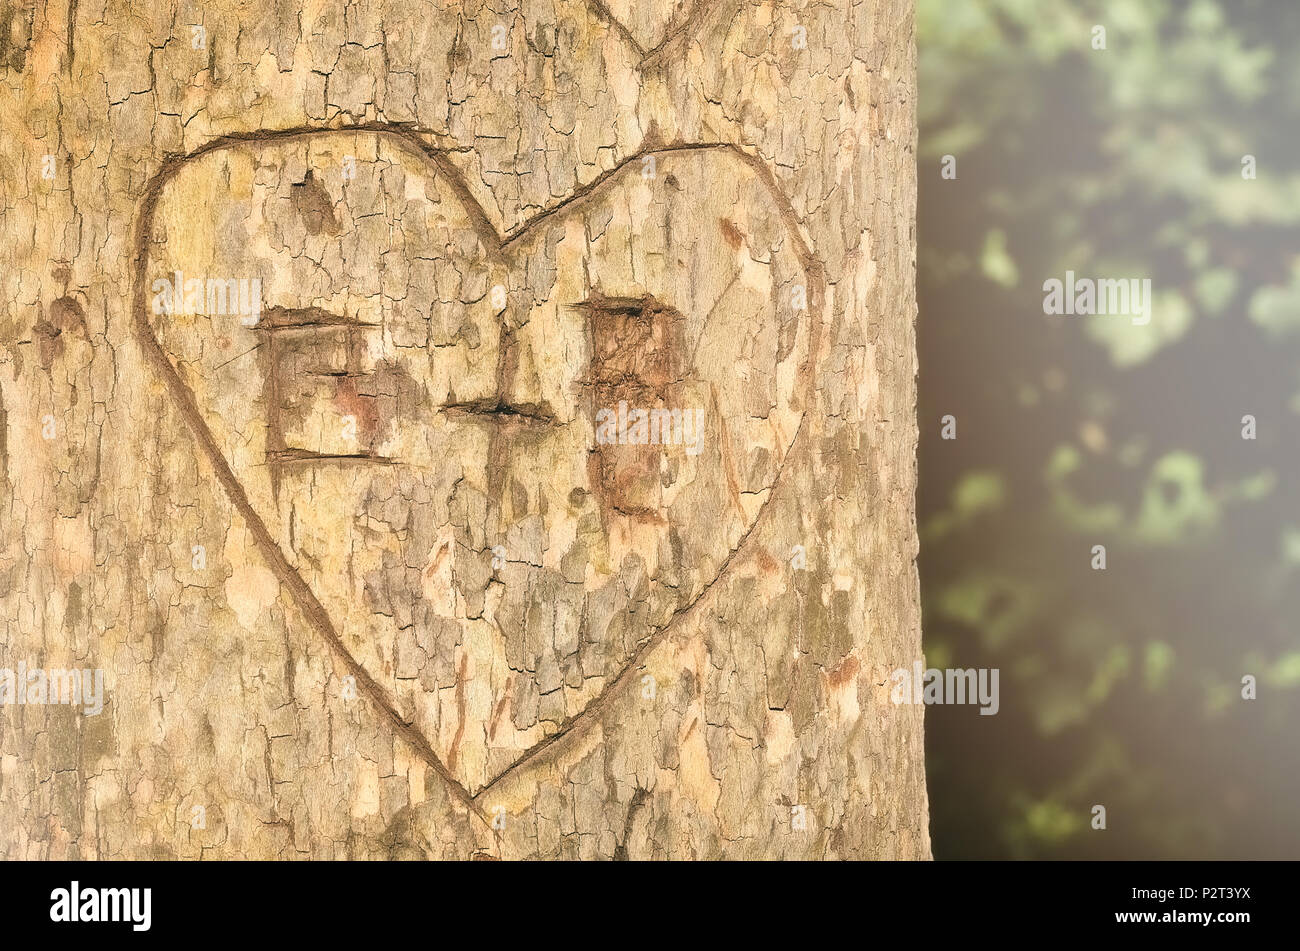 initials and a heart carved into a tree Stock Photo